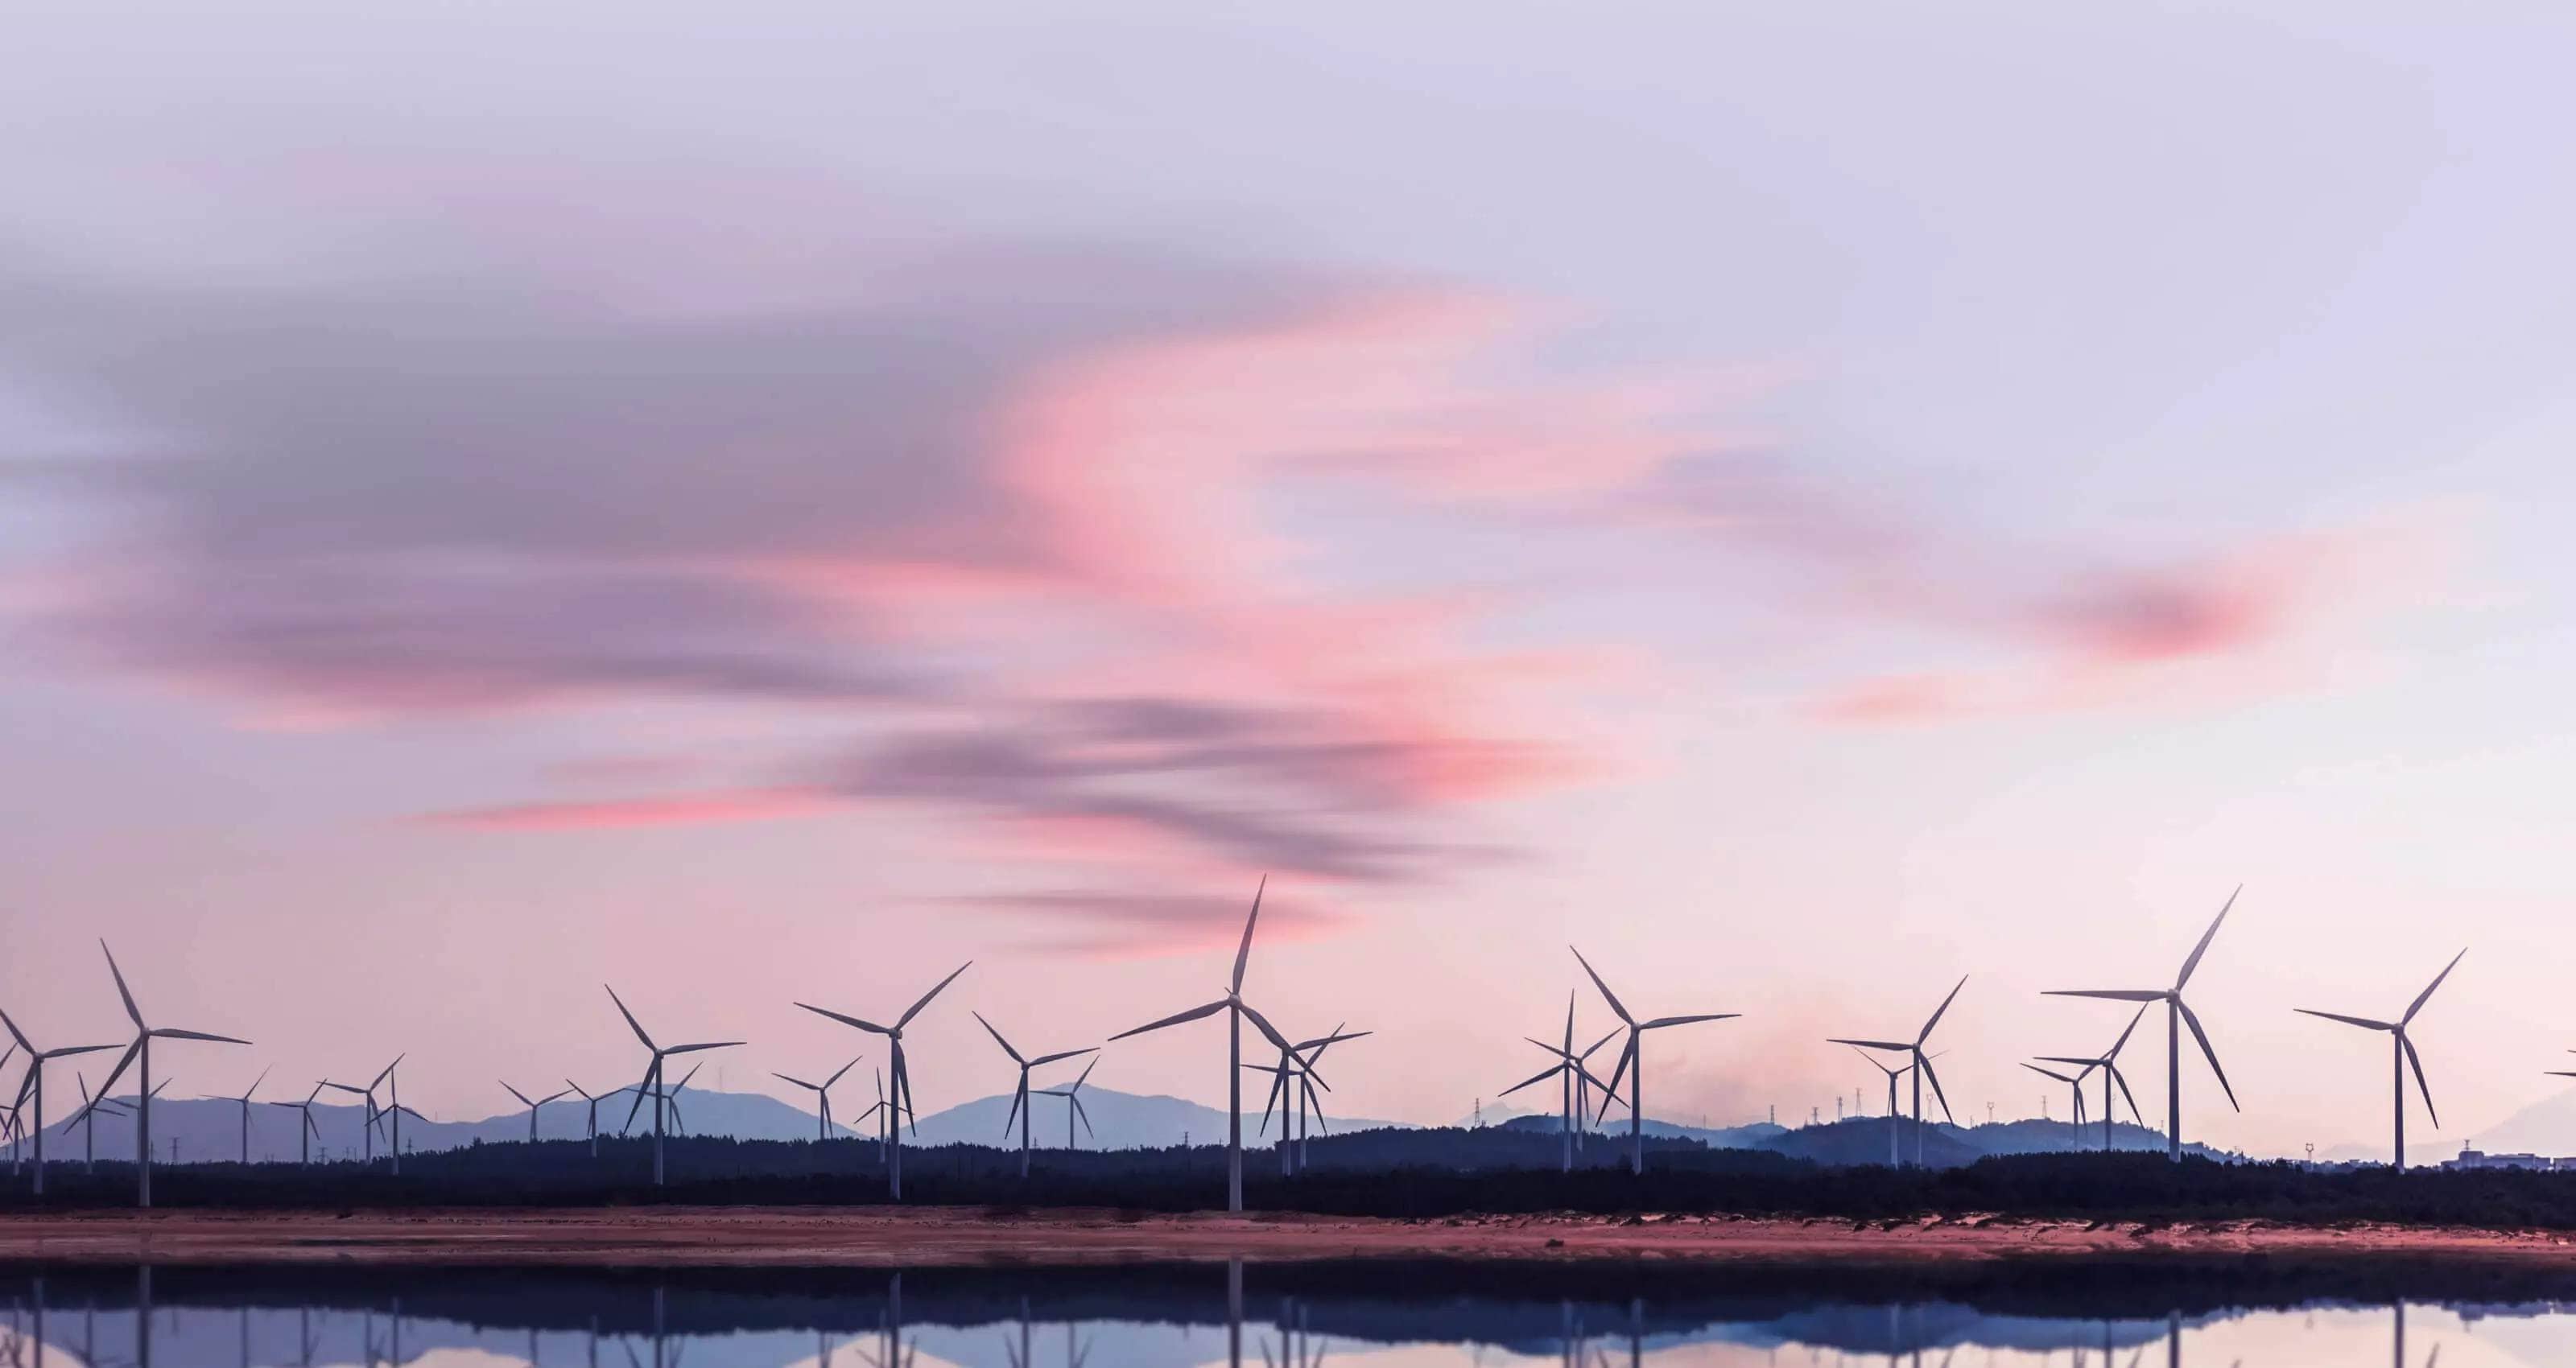 Multiple windmills dotting the foreground of the image with mountains and a beautiful sunset sitting behind them.